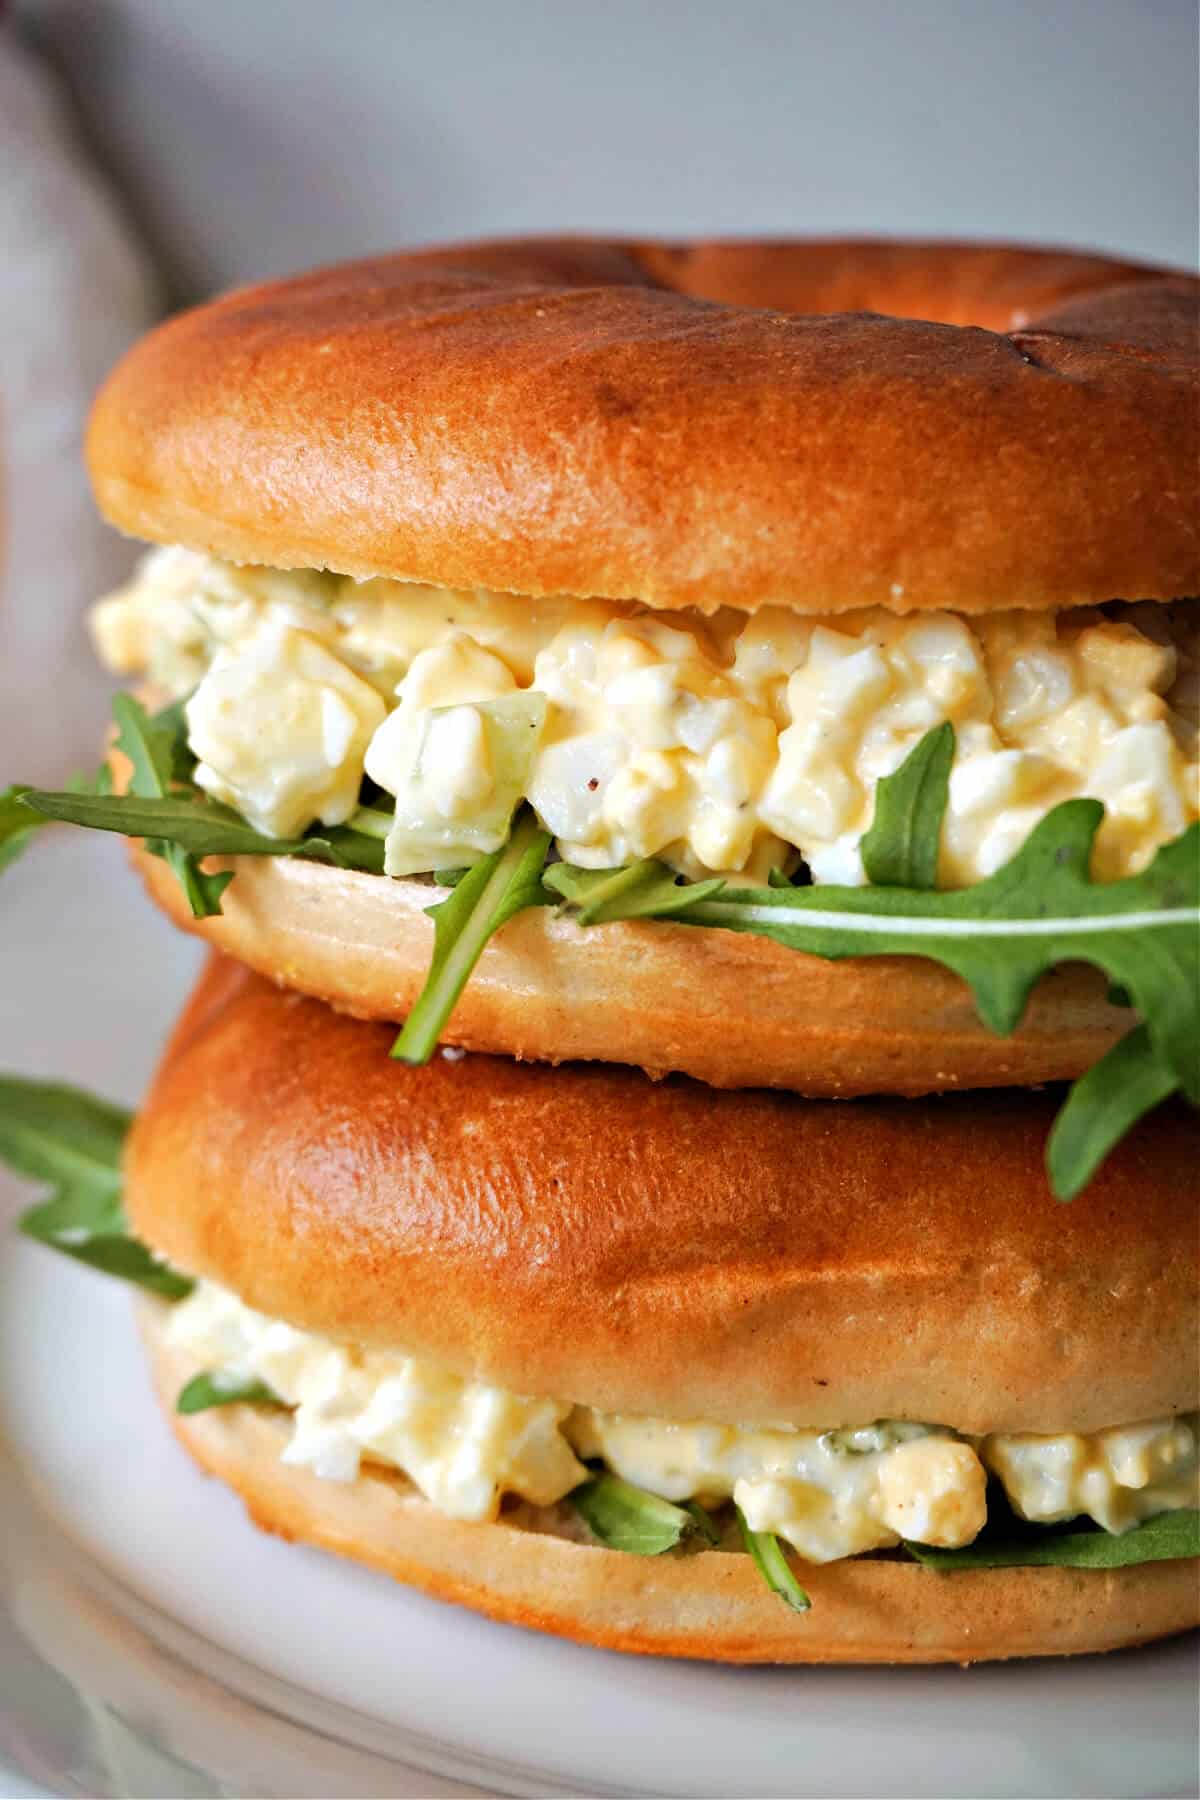 A stack of 2 egg sandwiches.